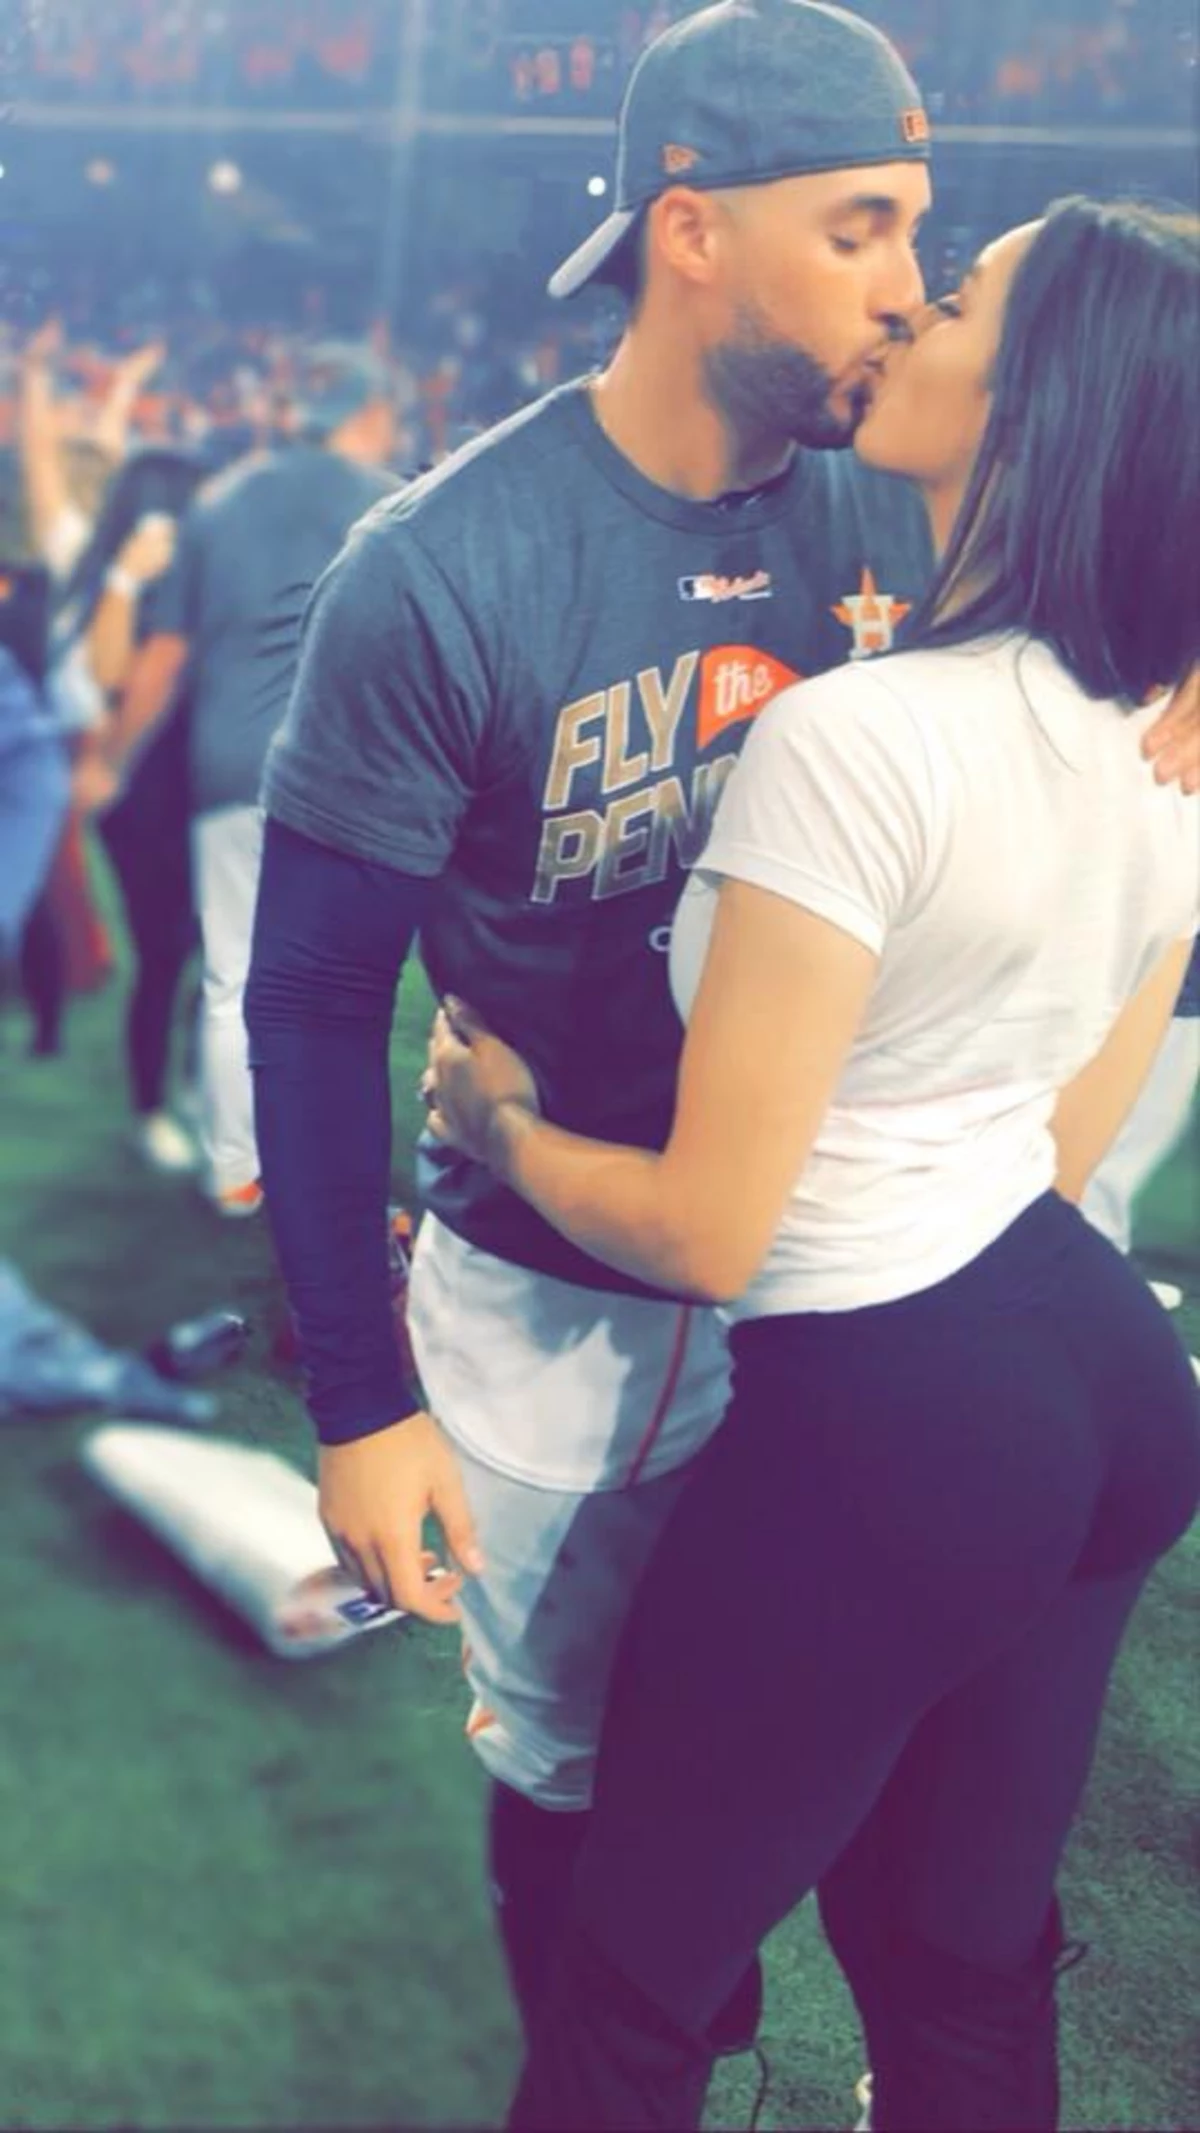 Meet Charlise Castro, George Springer's fiancée and former